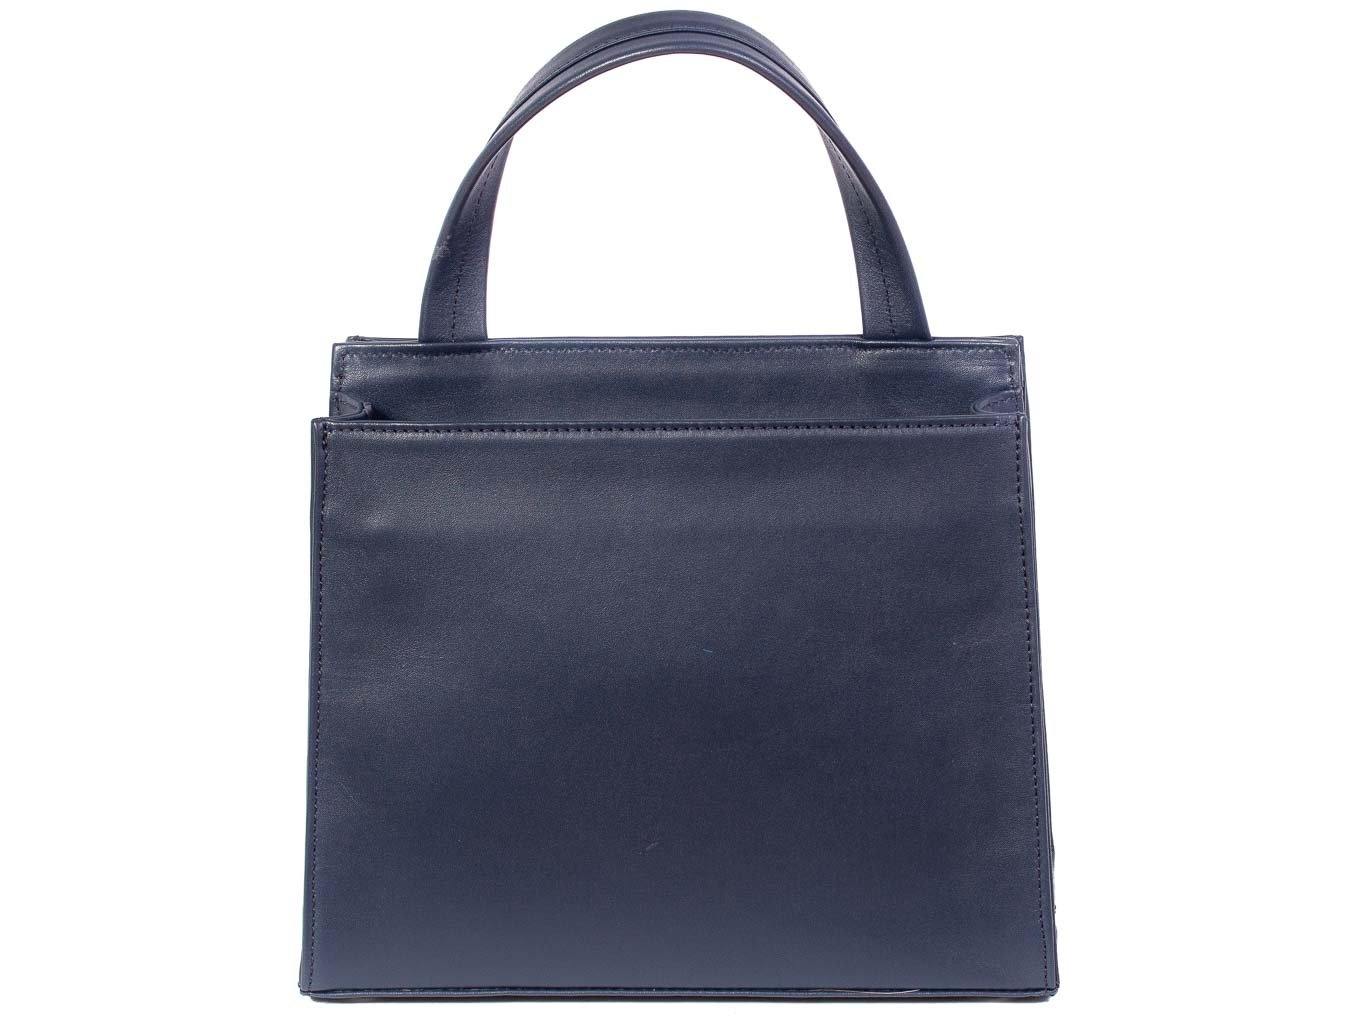 Top Handle Springbok Handbag in Navy Blue with a stripe feature by Sherene Melinda back